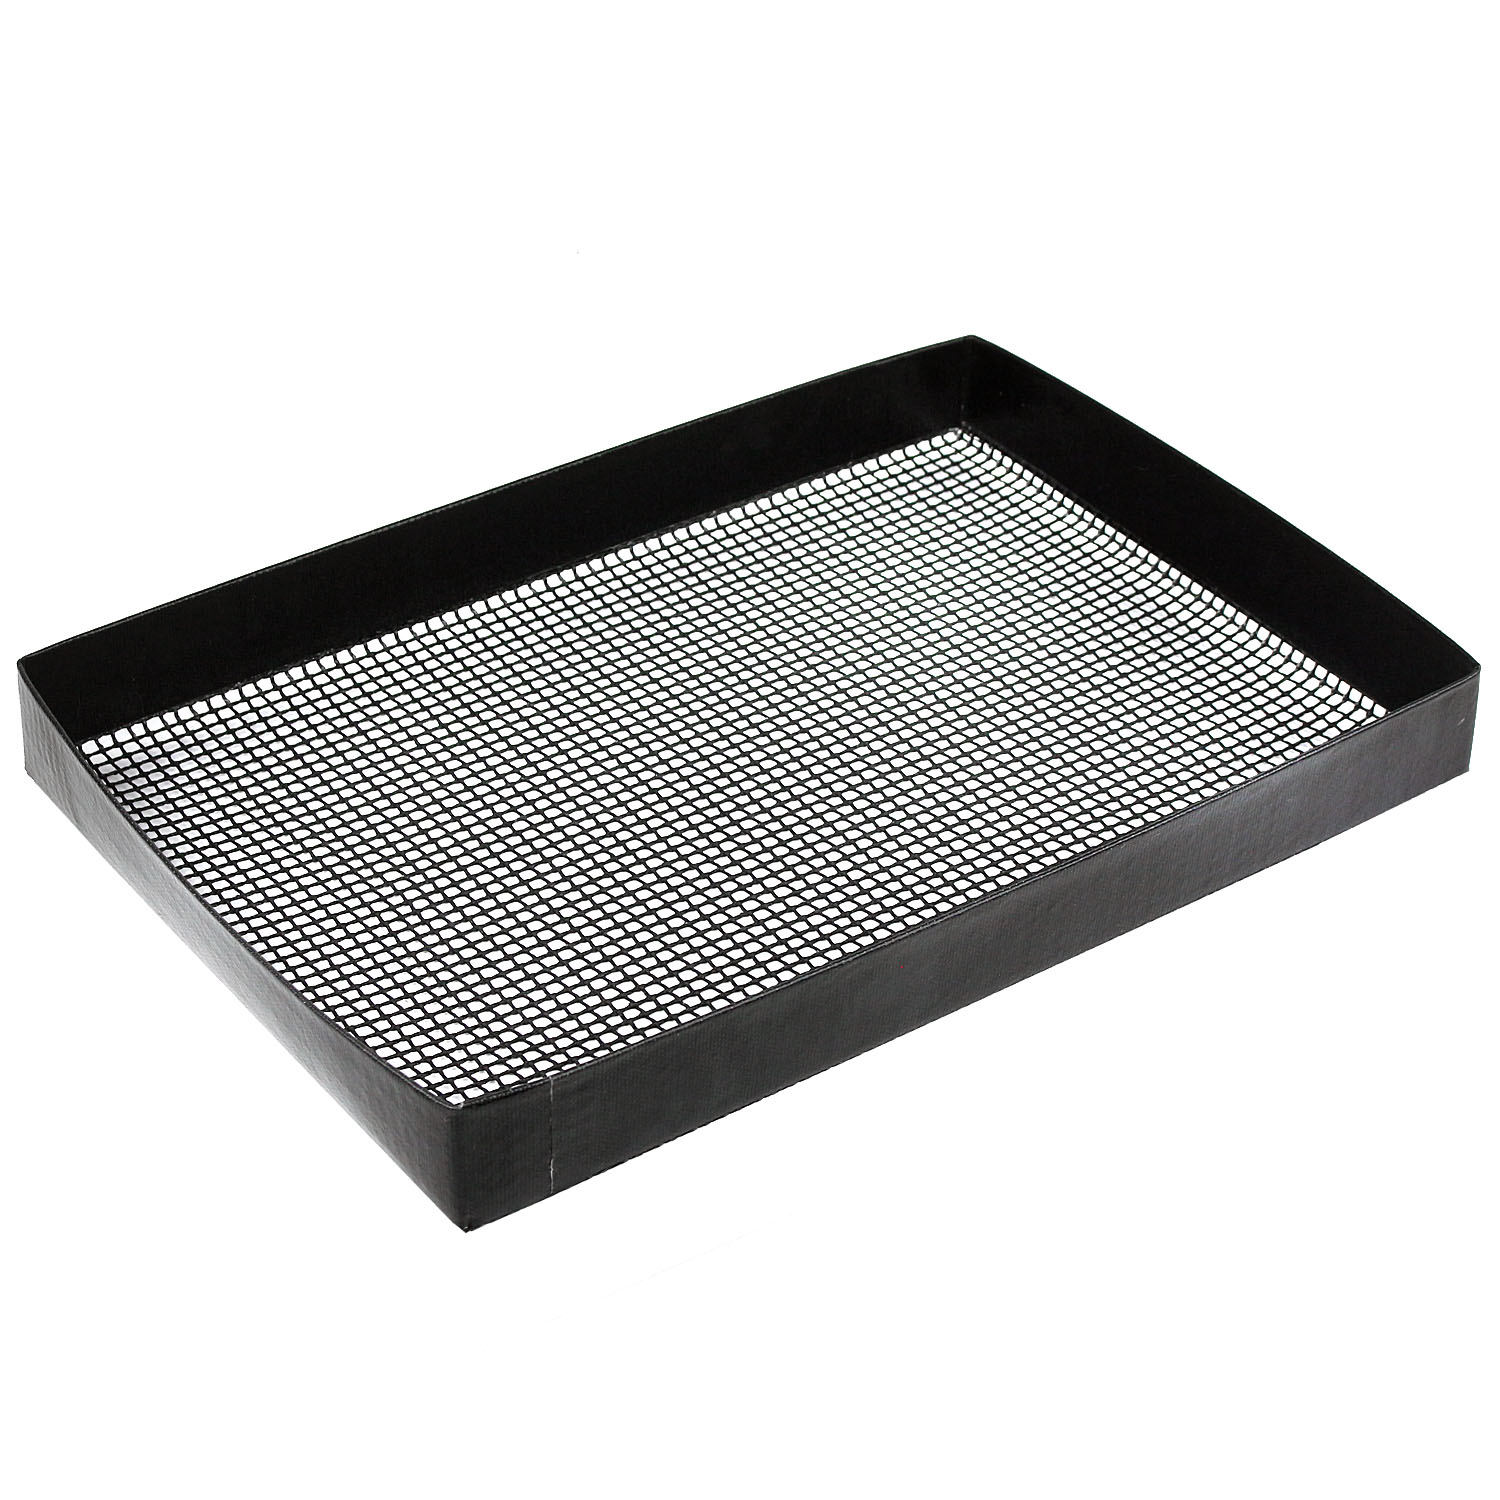 Heavy Duty Smoker BBQ Grill Basket 16.5" x 11.6" x 1.5" Non-Stick PTFE Wide Mesh Essentialware SNS111655 - image 1 of 3